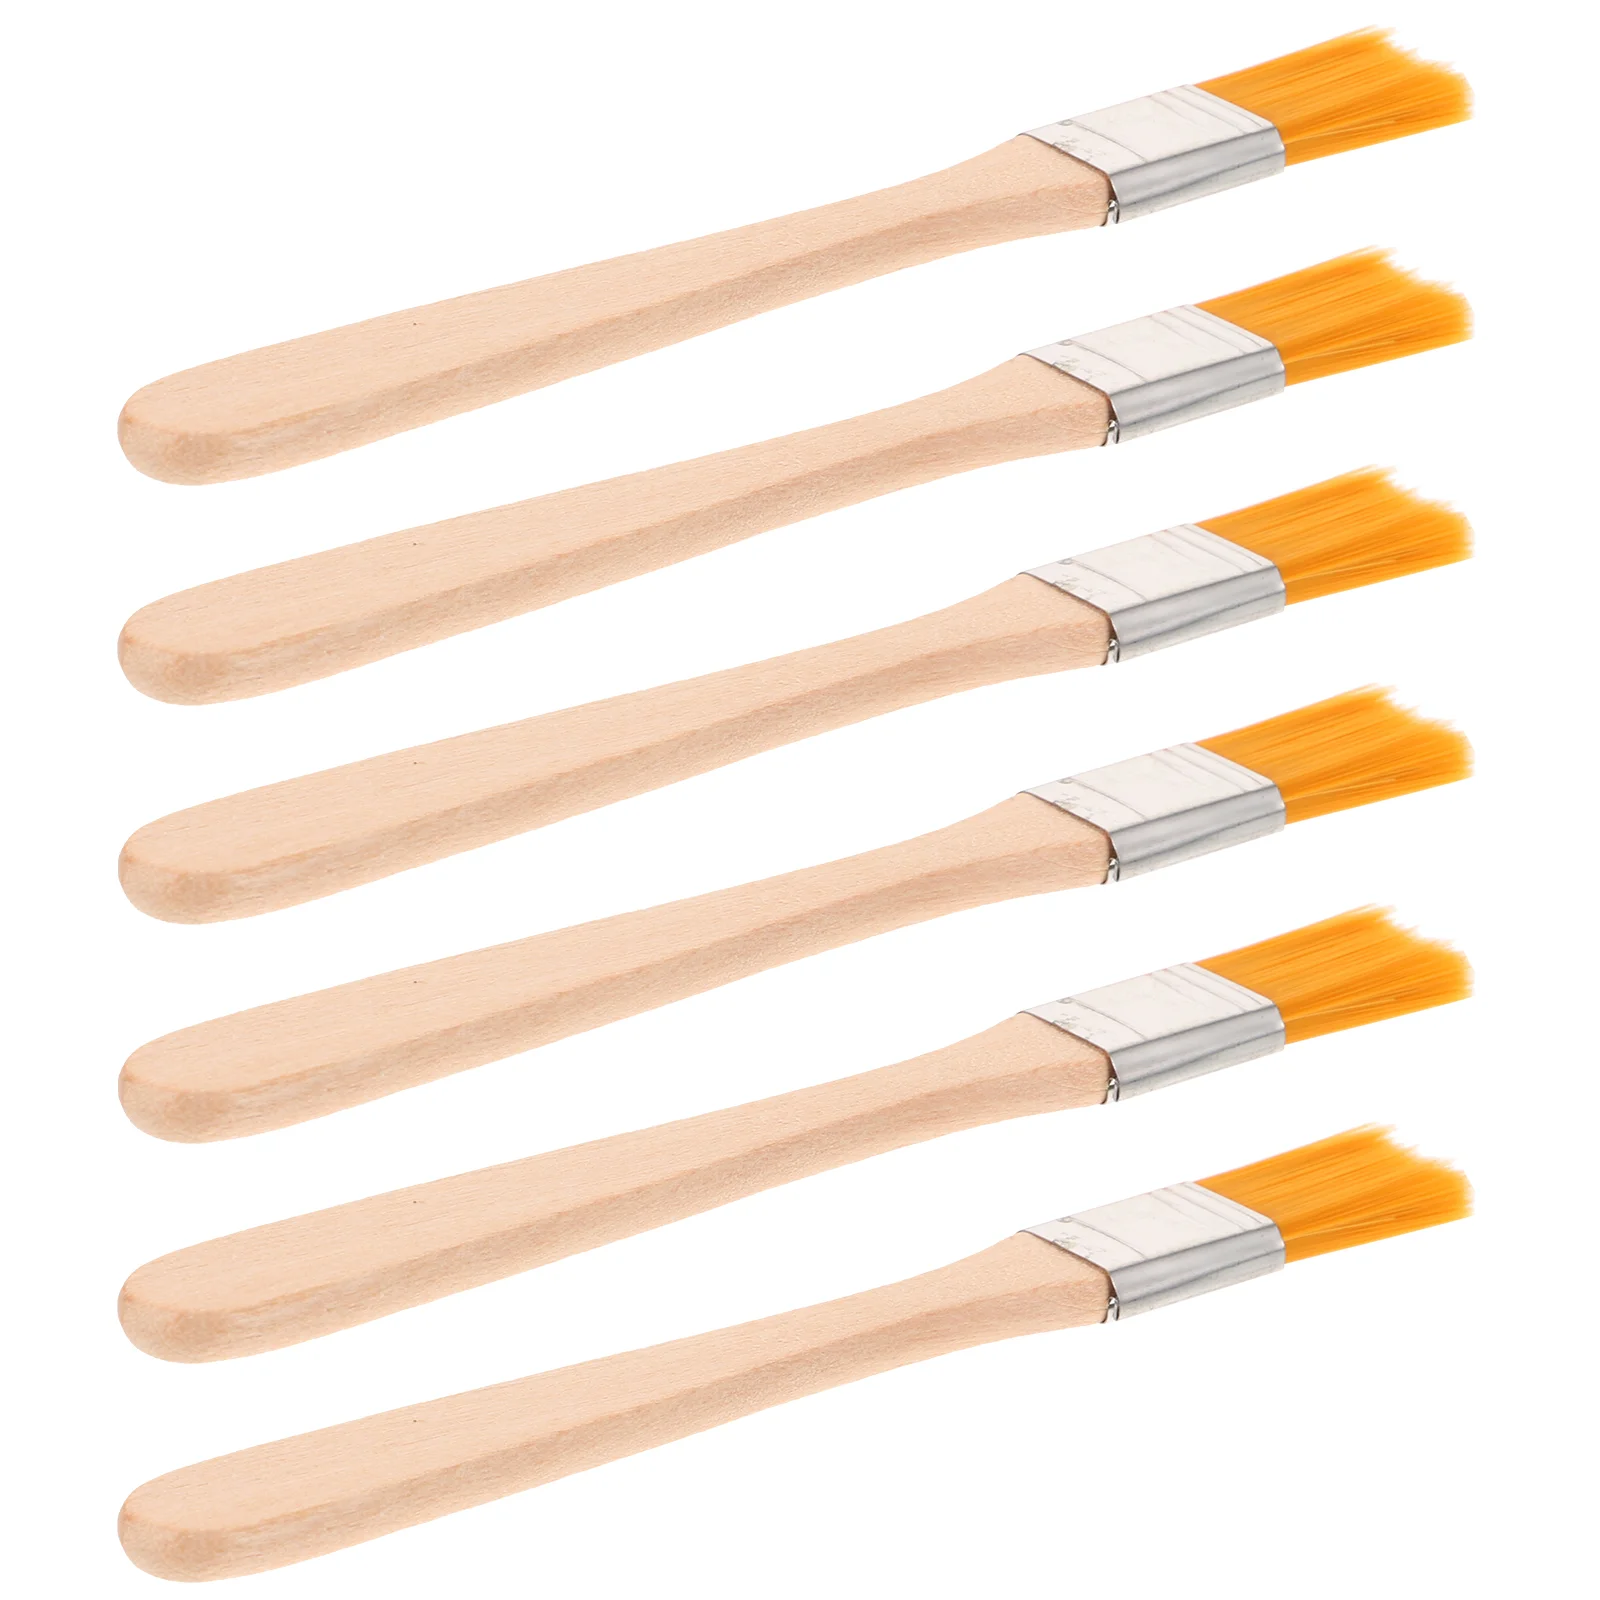 

6 Pcs Paint Brush Painting Small for Wall Nylon Portable with Wood Handle Wooden Half Inch Brushes